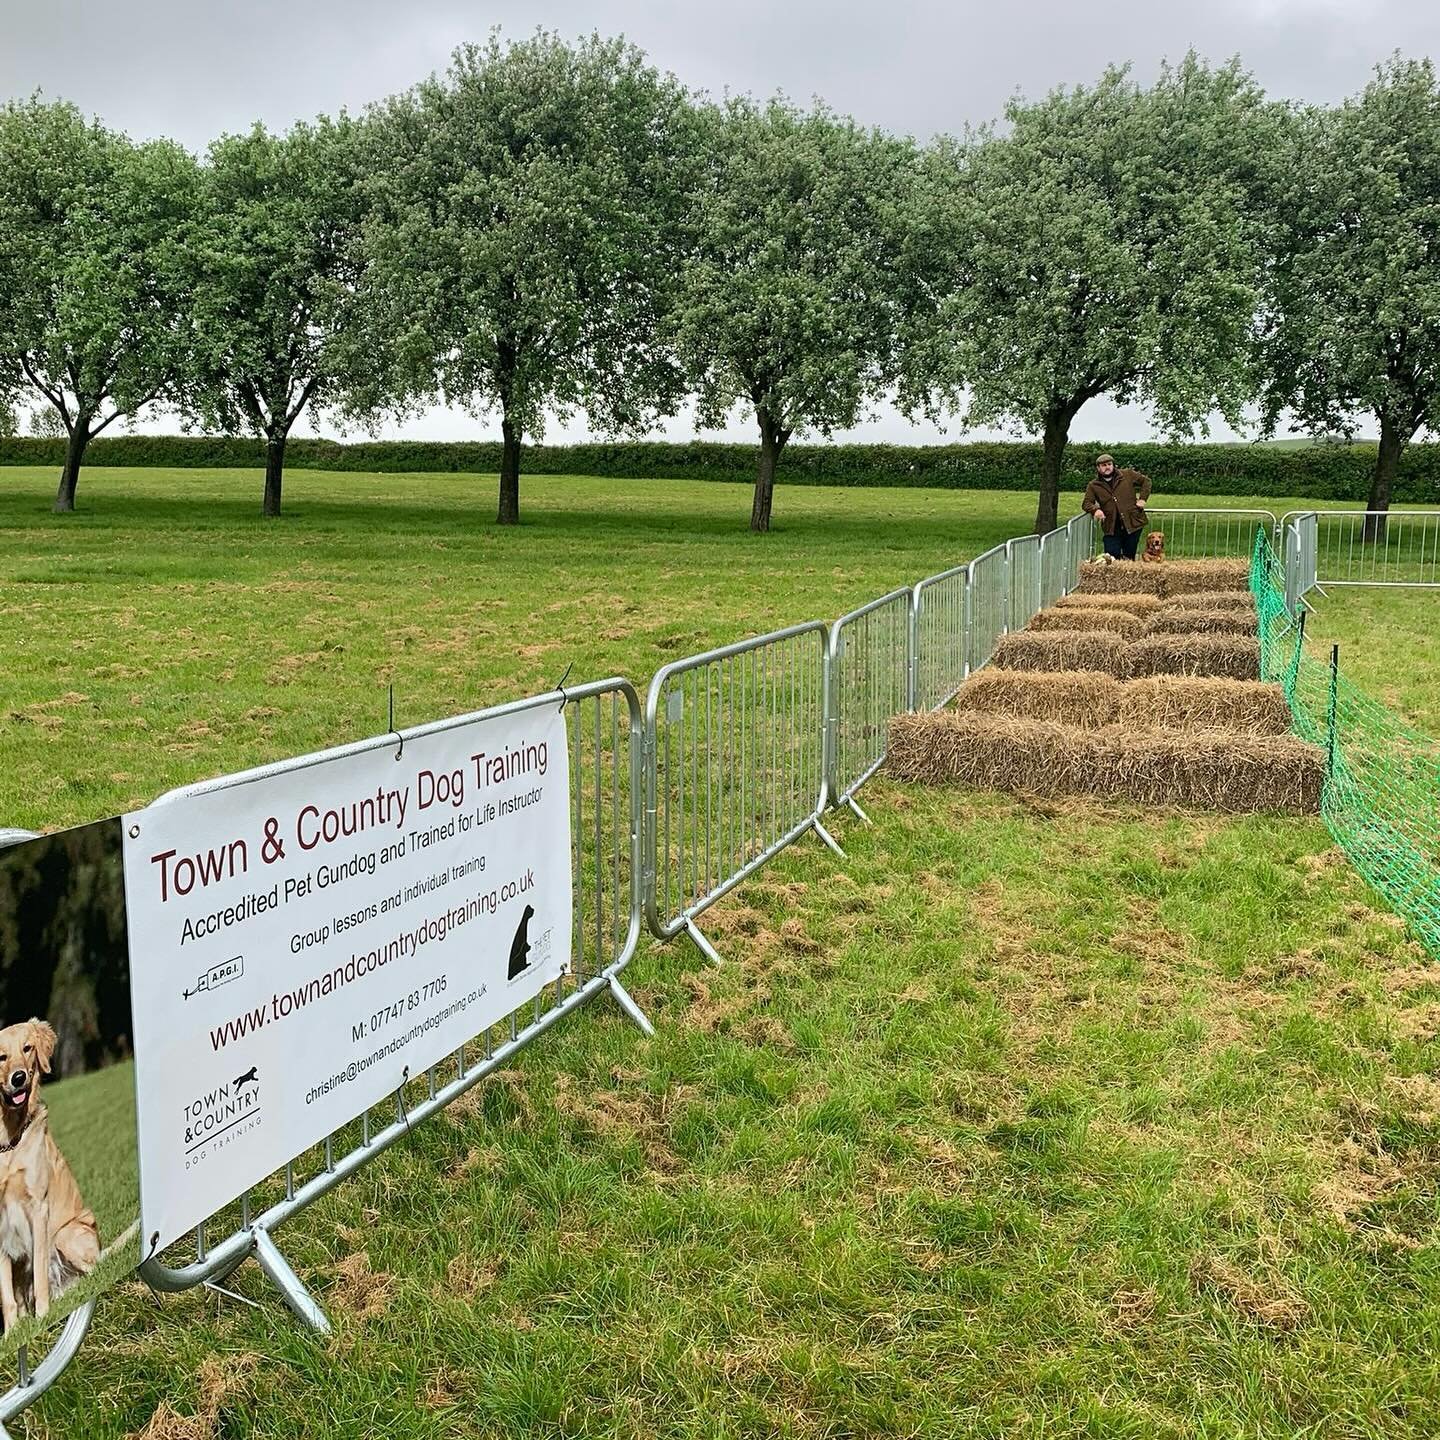 For the second year running we were invited by @adoggydayout to run the fun scurry at The Big Bark event. The weather could have been better hence not many picture but a few brilliant snapshots nevertheless. Thank you to all my helpers making the day